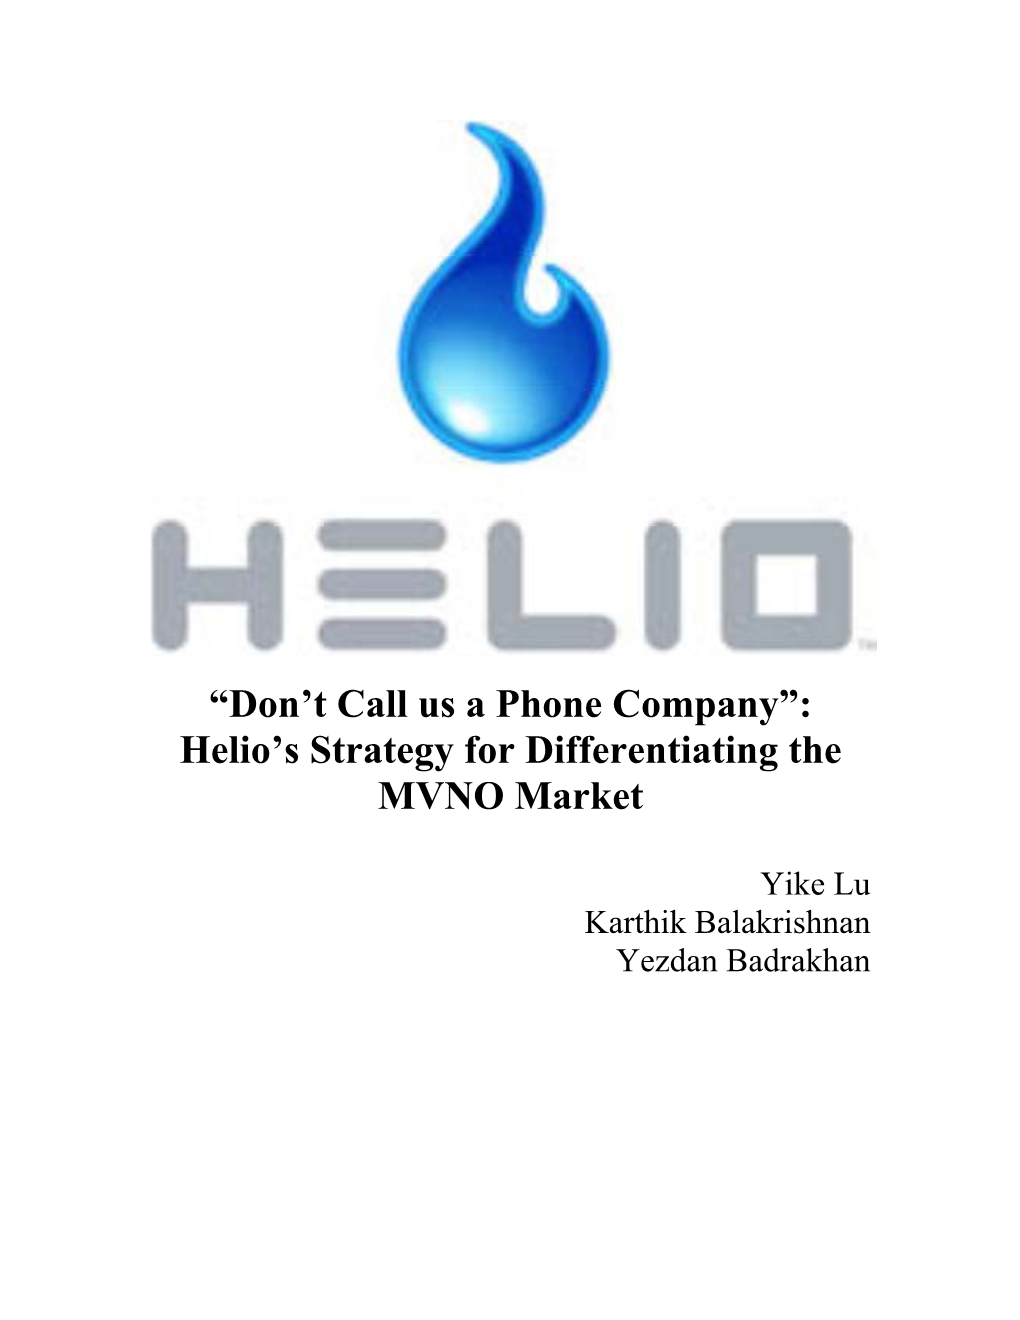 Helio's Strategy for Differentiating the MVNO Market